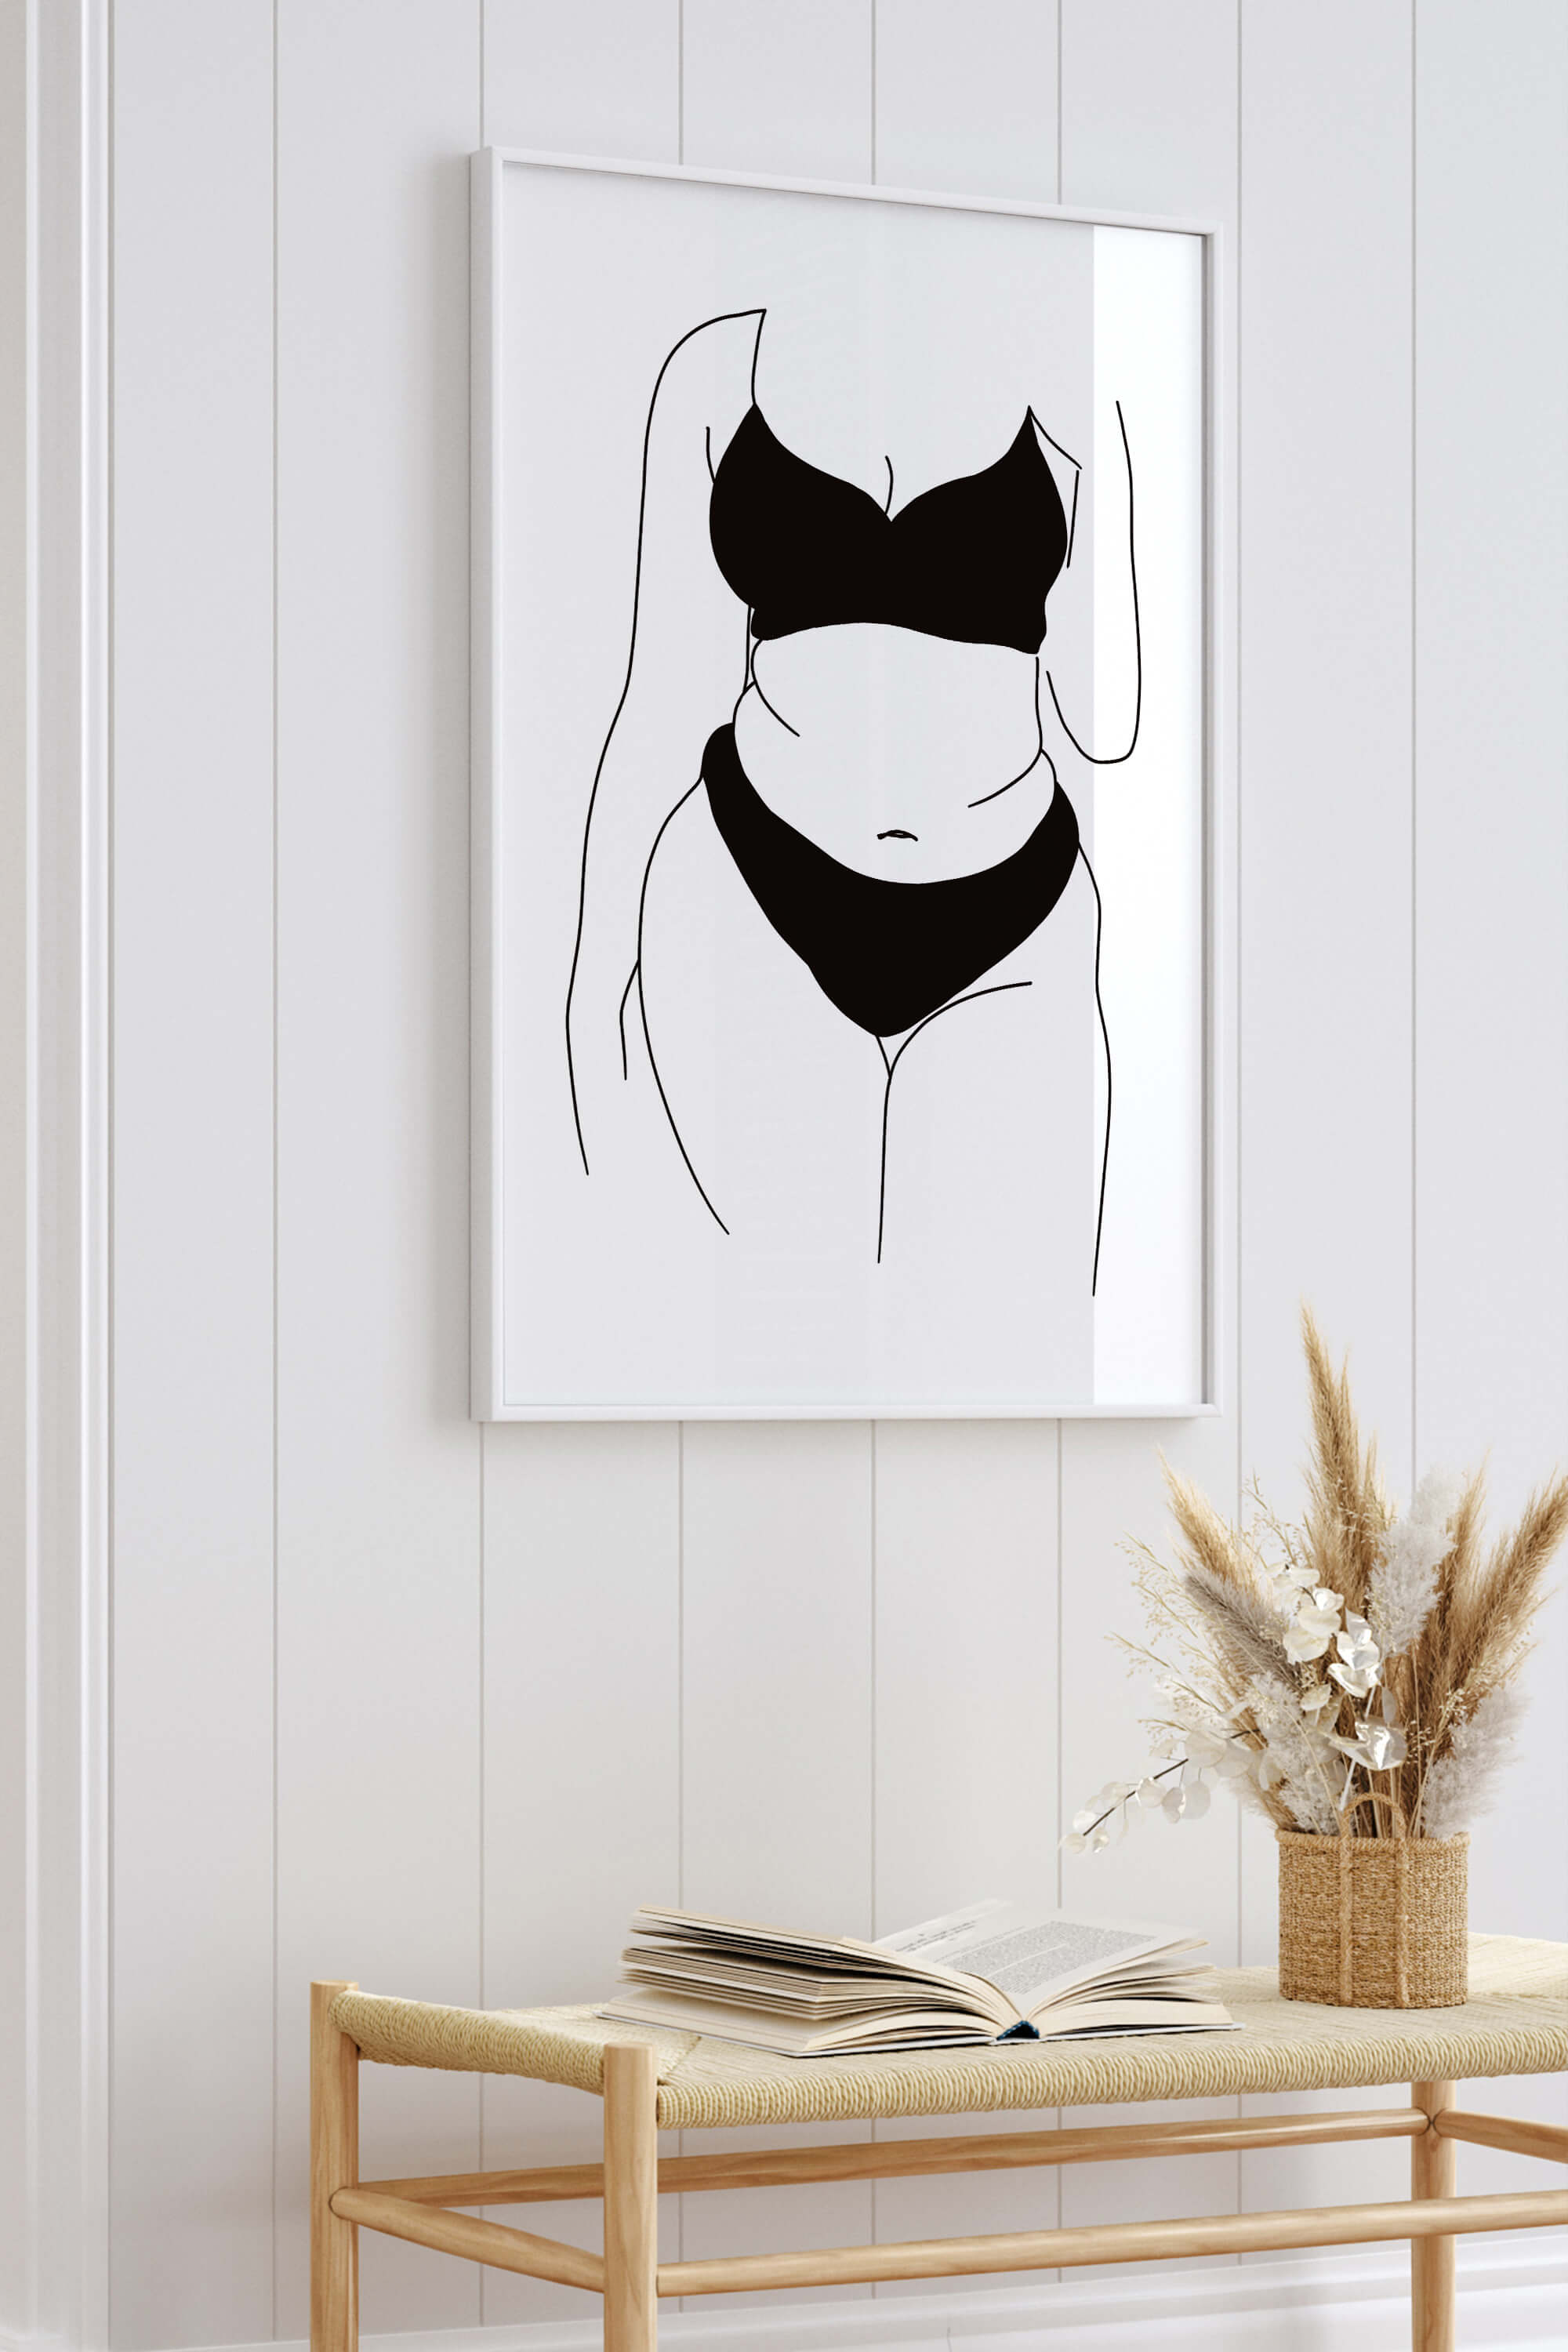 A limited edition expression of elegance and power, celebrating the beauty of curvy women. The print is a unique addition to any art collection, representing individuality.